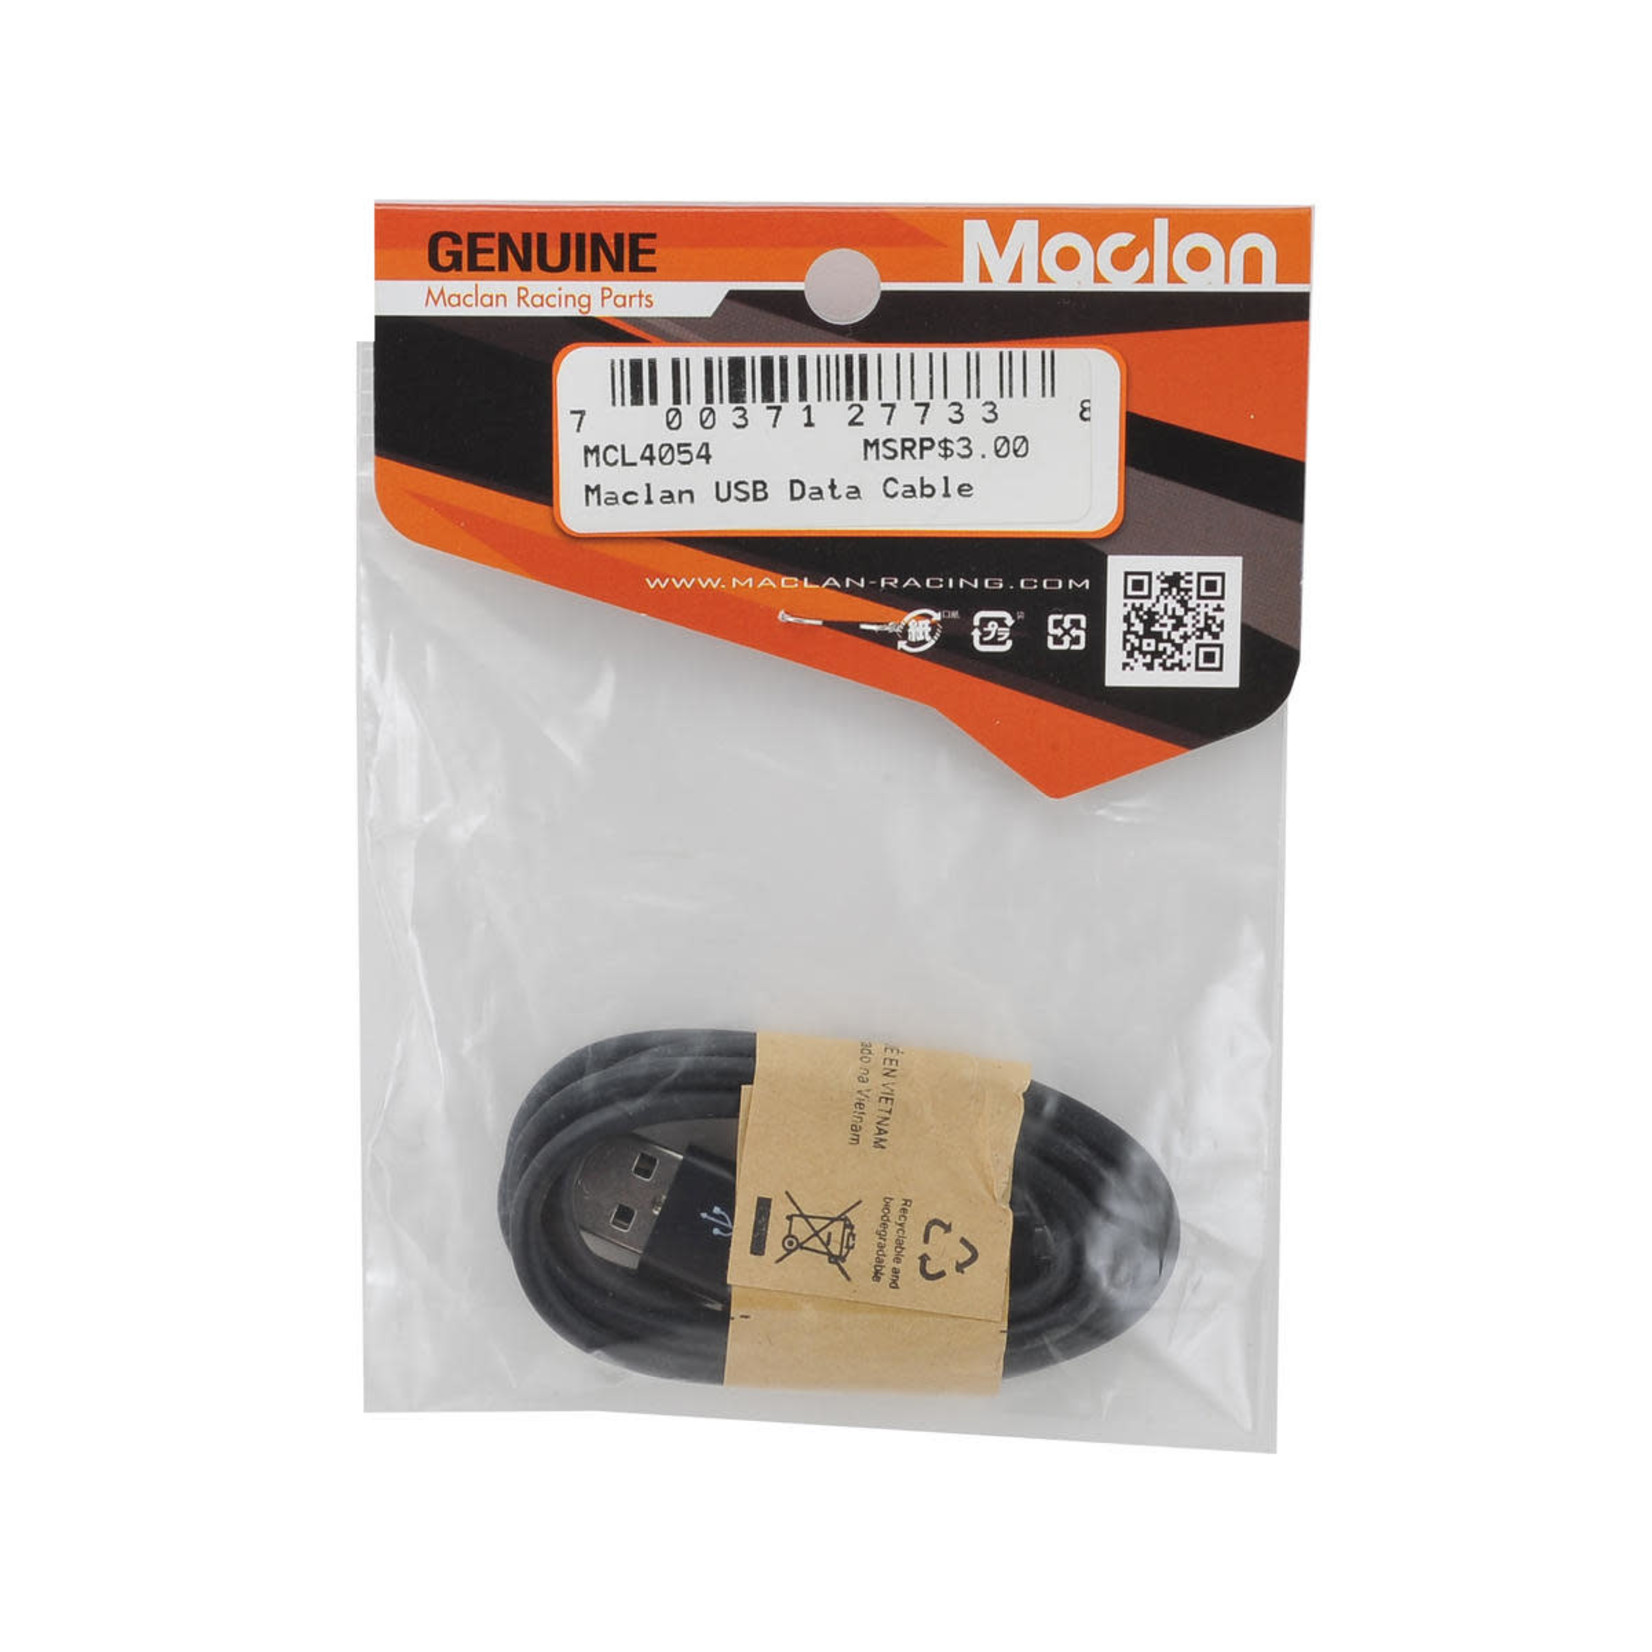 Maclan Maclan USB Data Cable #MCL4054